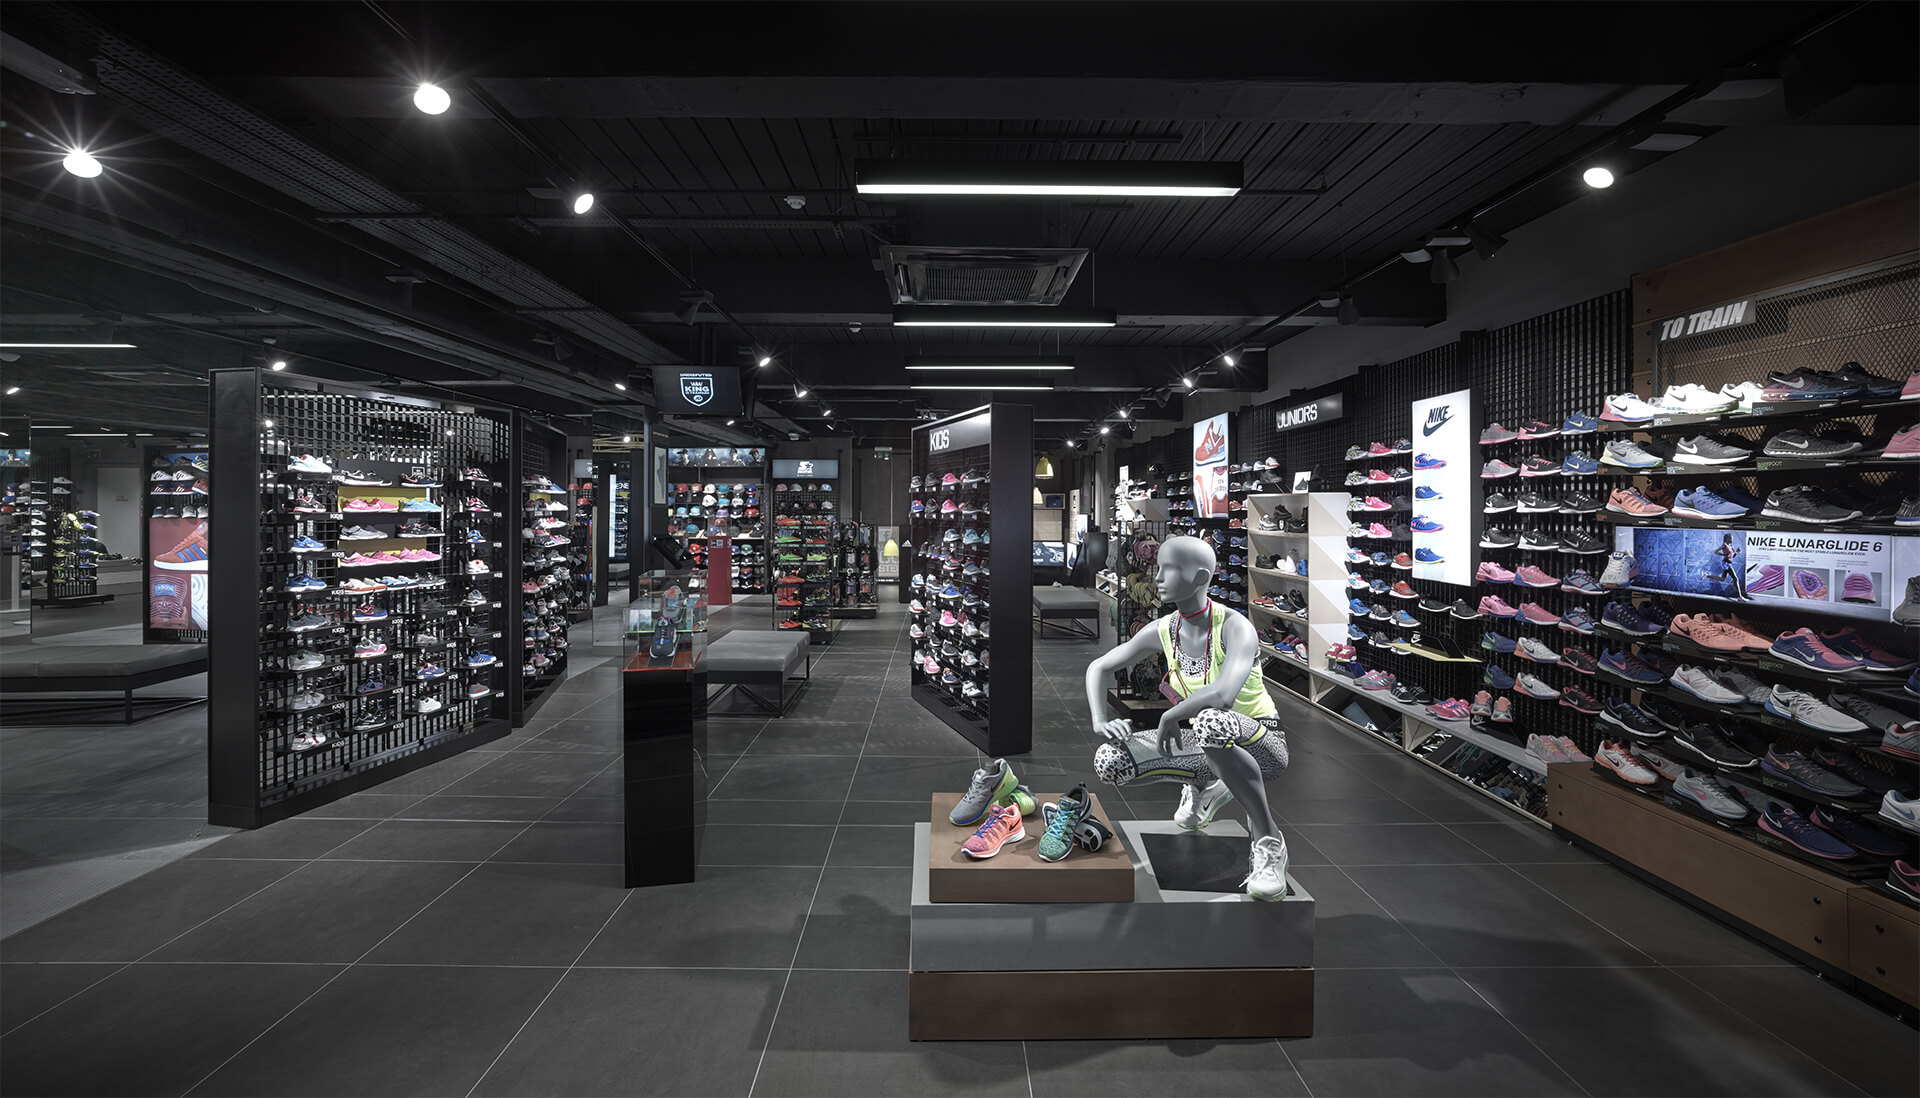 JD Sports Trafford Center flagship store, Manchester - ROC Consulting